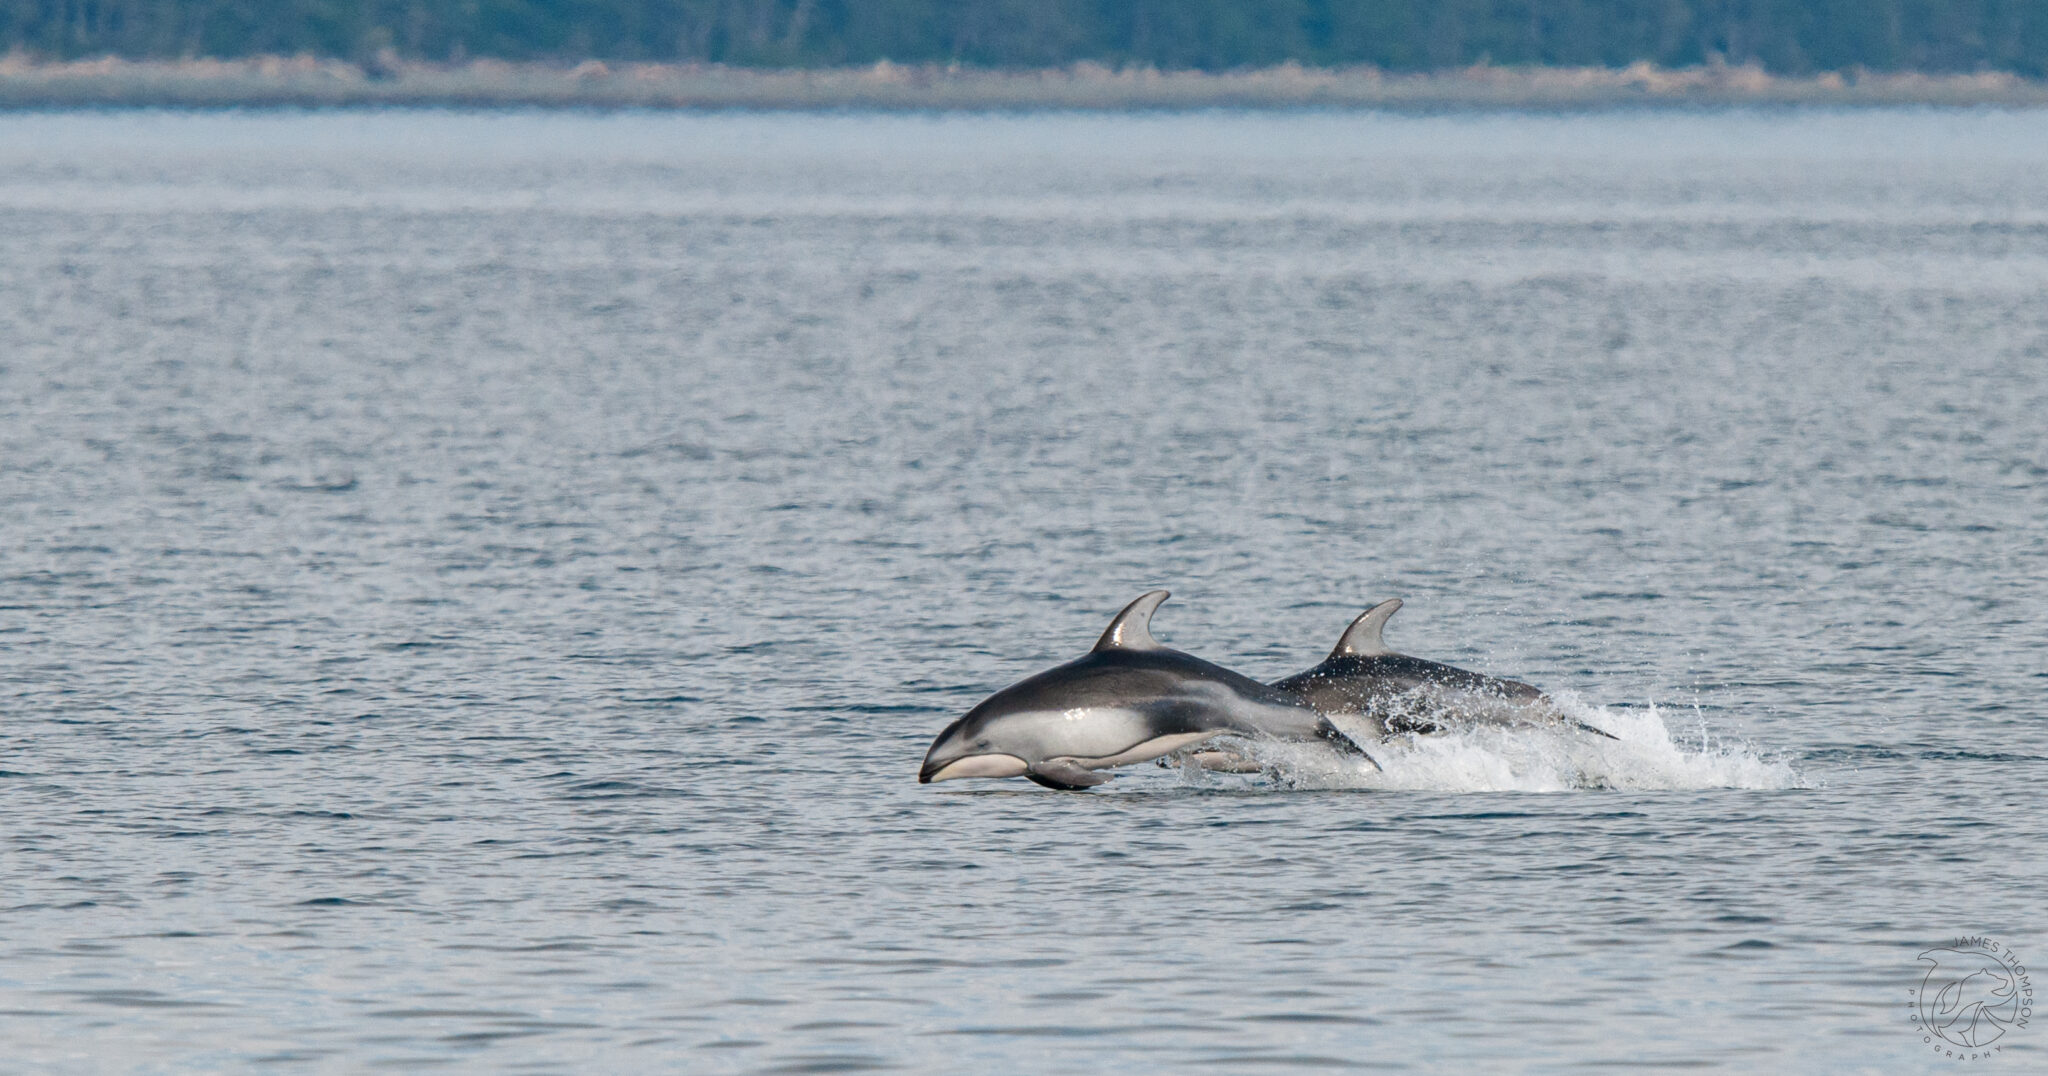 Pacific White-Sided Dolphins | Credit: James Thompson Photography